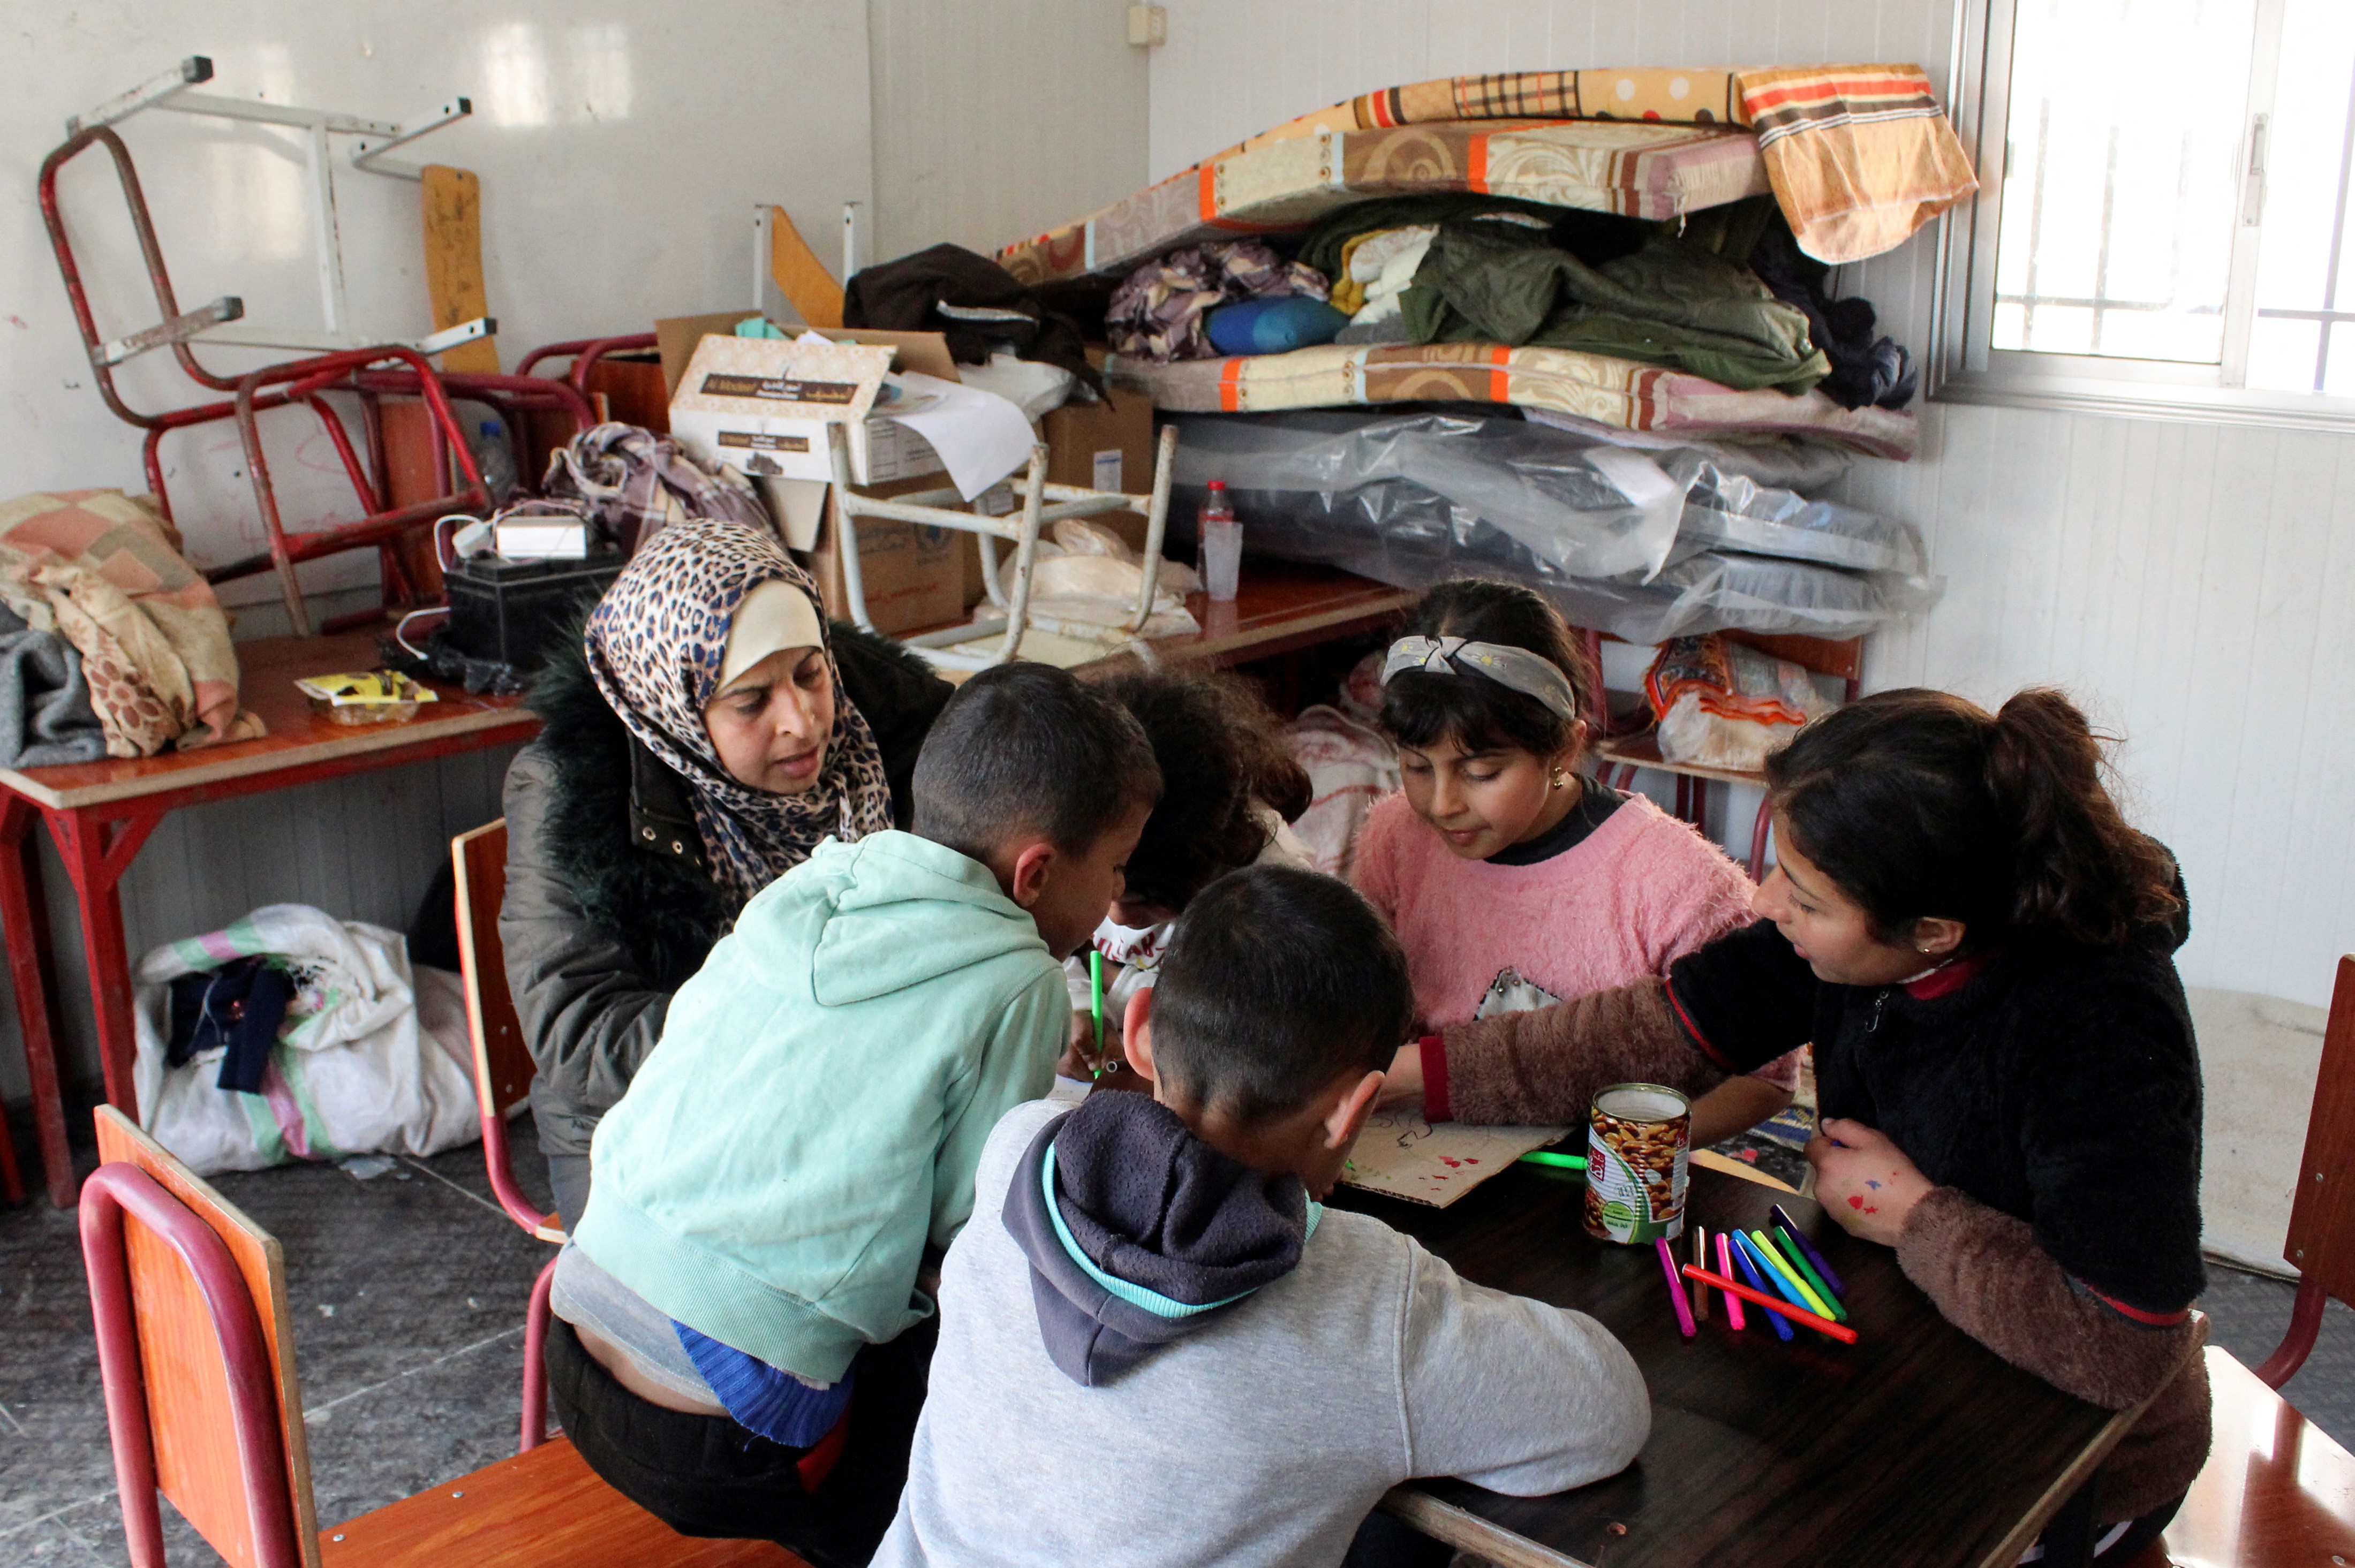 Yasmine Asaad Yassin, a 39-year-old mother of three, sits with her children and others in a school turned to a shelter for families affected by the deadly earthquake, in Latakia, Syria, February 23, 2023. Photo: Reuters